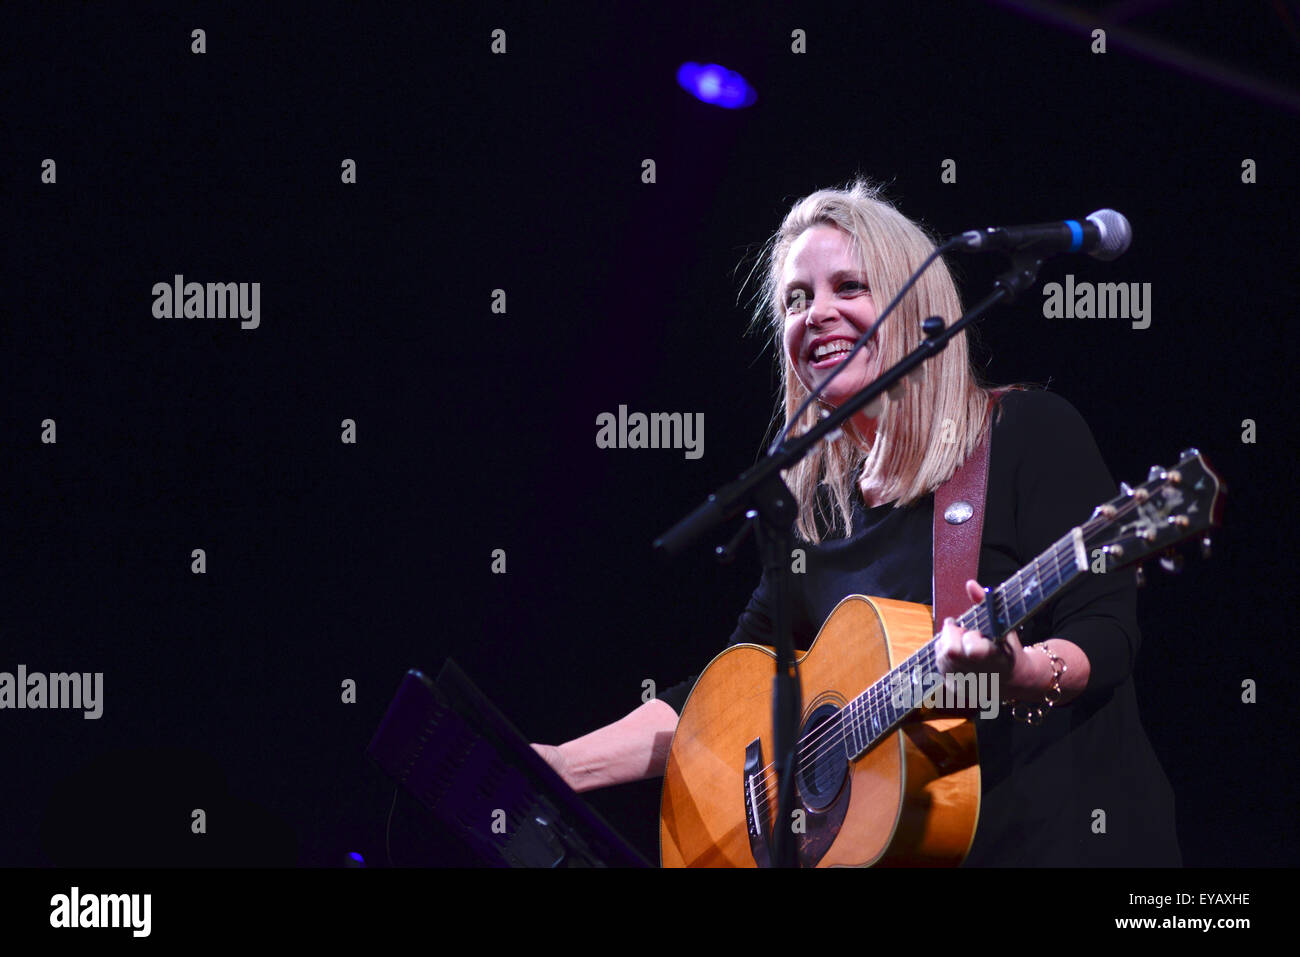 Mary Chapin Carpenter performing at Underneath the Stars Festival, Barnsley, South Yorkshire. Picture: Scott Bairstow/Alamy Stock Photo